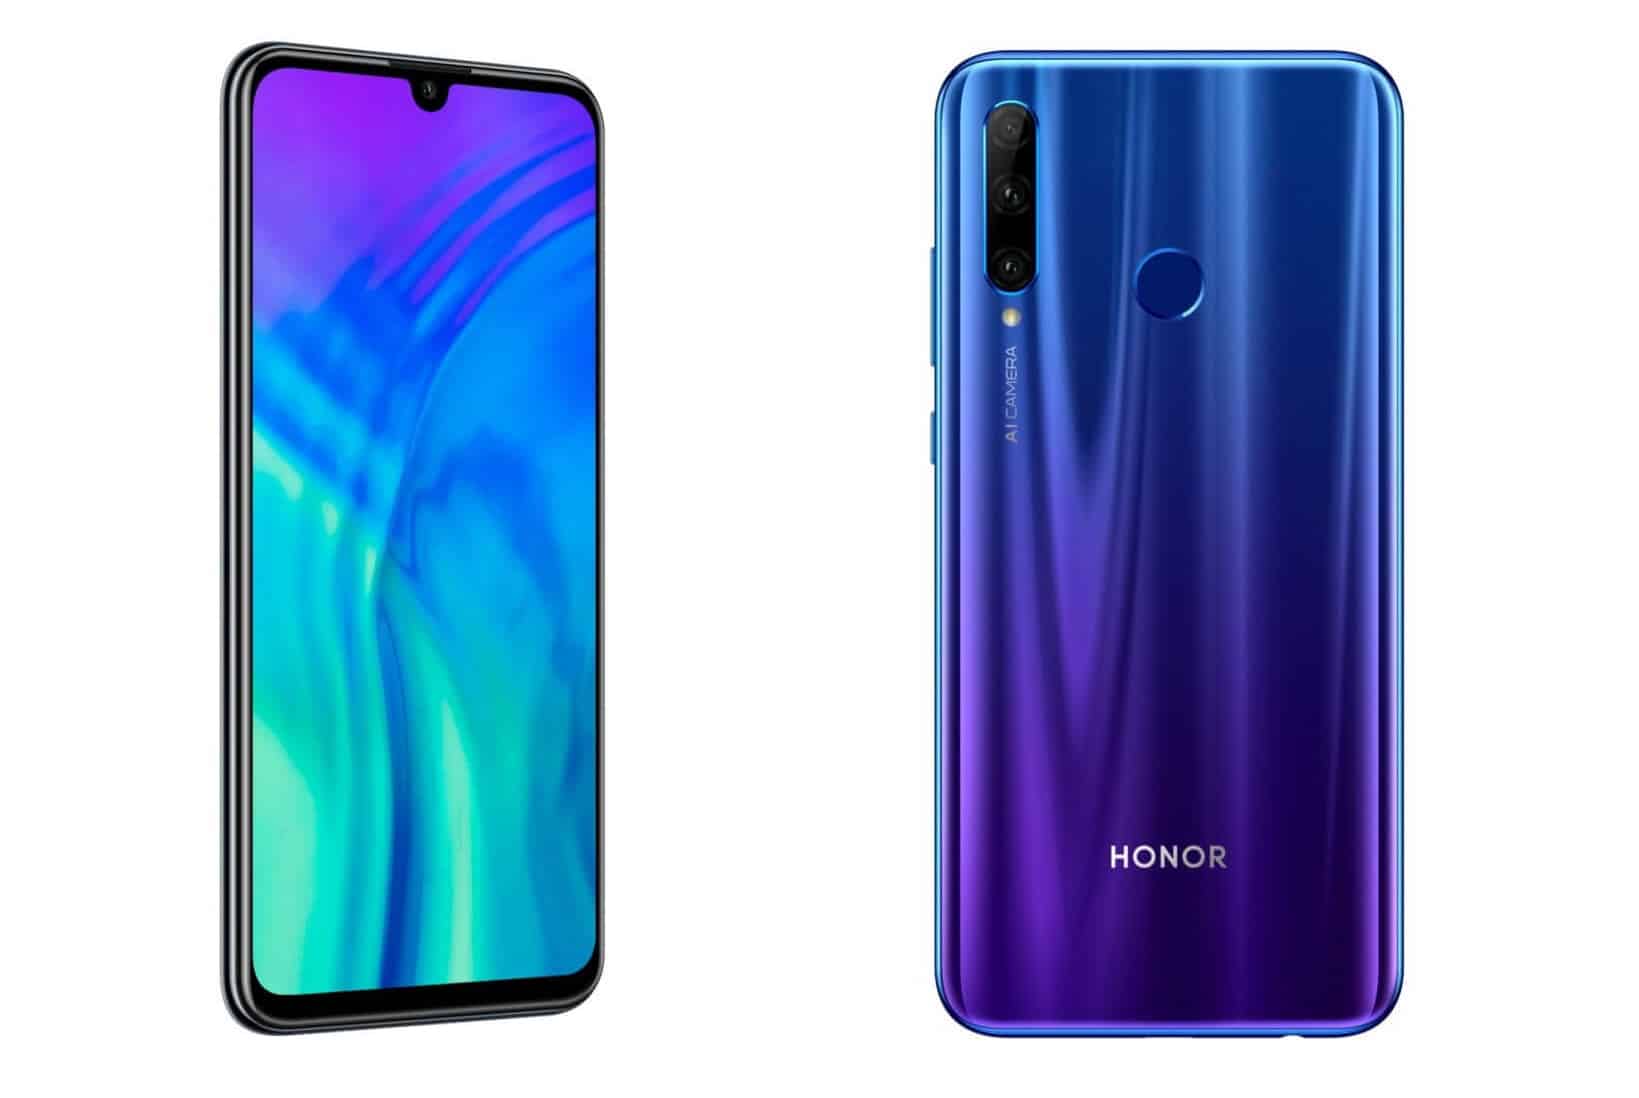 The HONOR 20 Lite renders from the front and back.